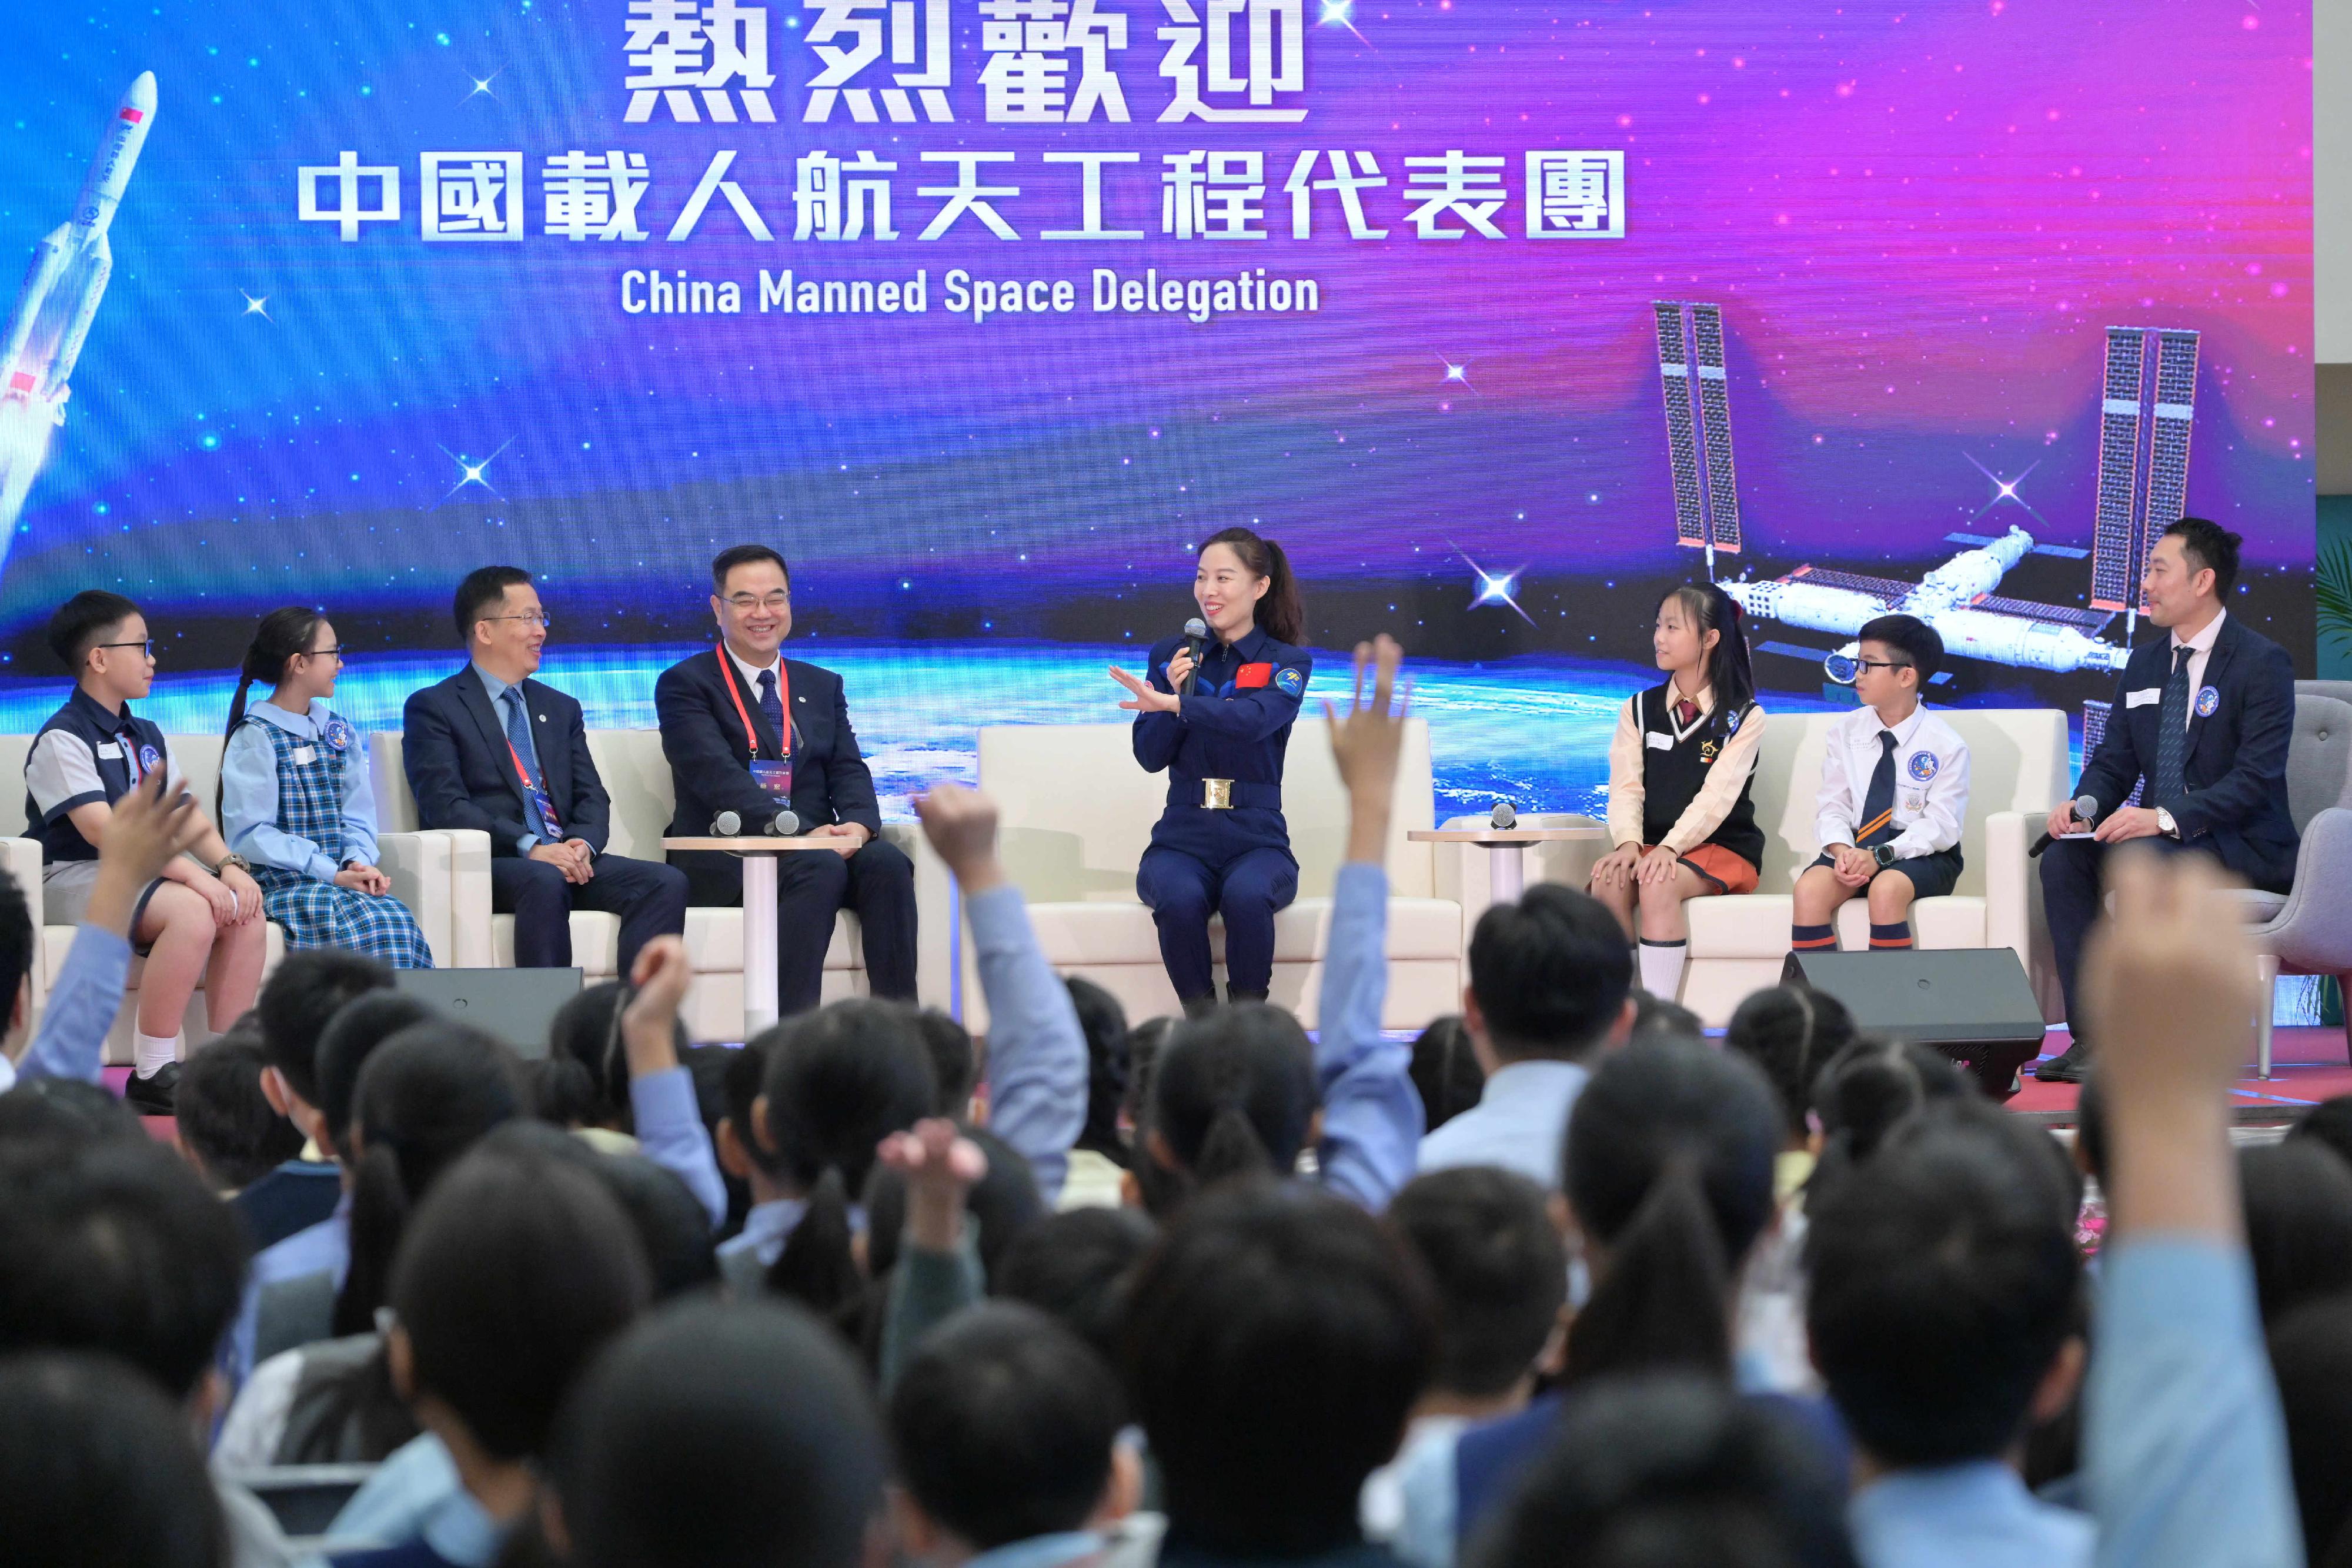 The China Manned Space delegation continued their visit in Hong Kong today (November 29). Photo shows Shenzhou-13 astronaut Ms Wang Yaping (fourth right) attending a dialogue session with students at Hong Kong Baptist University Affiliated School Wong Kam Fai Secondary and Primary School (Primary Division).





